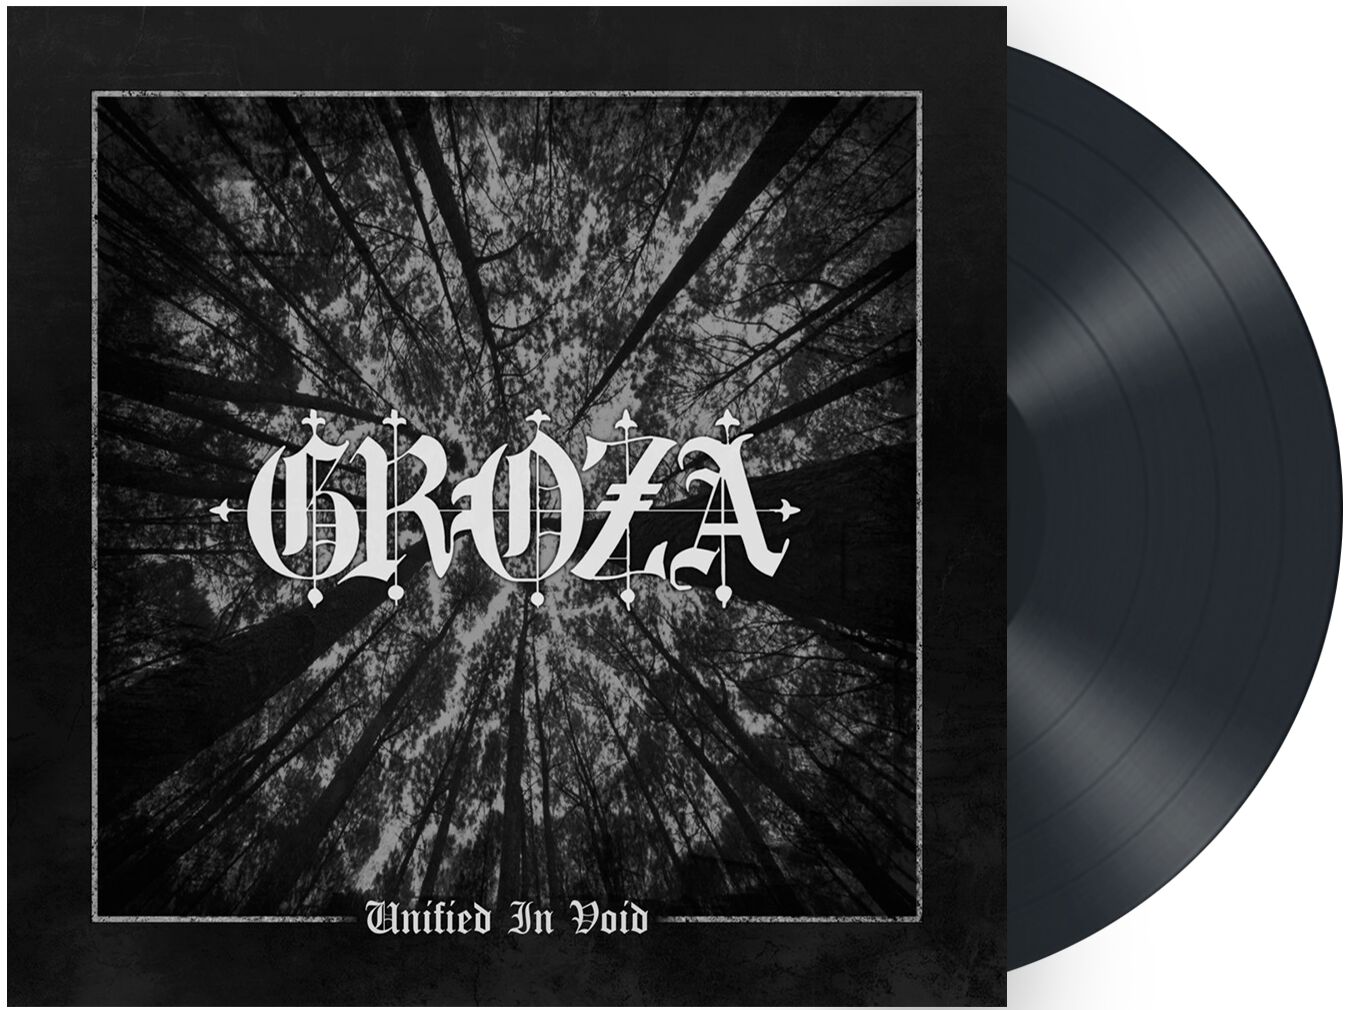 Groza Unified in void LP black